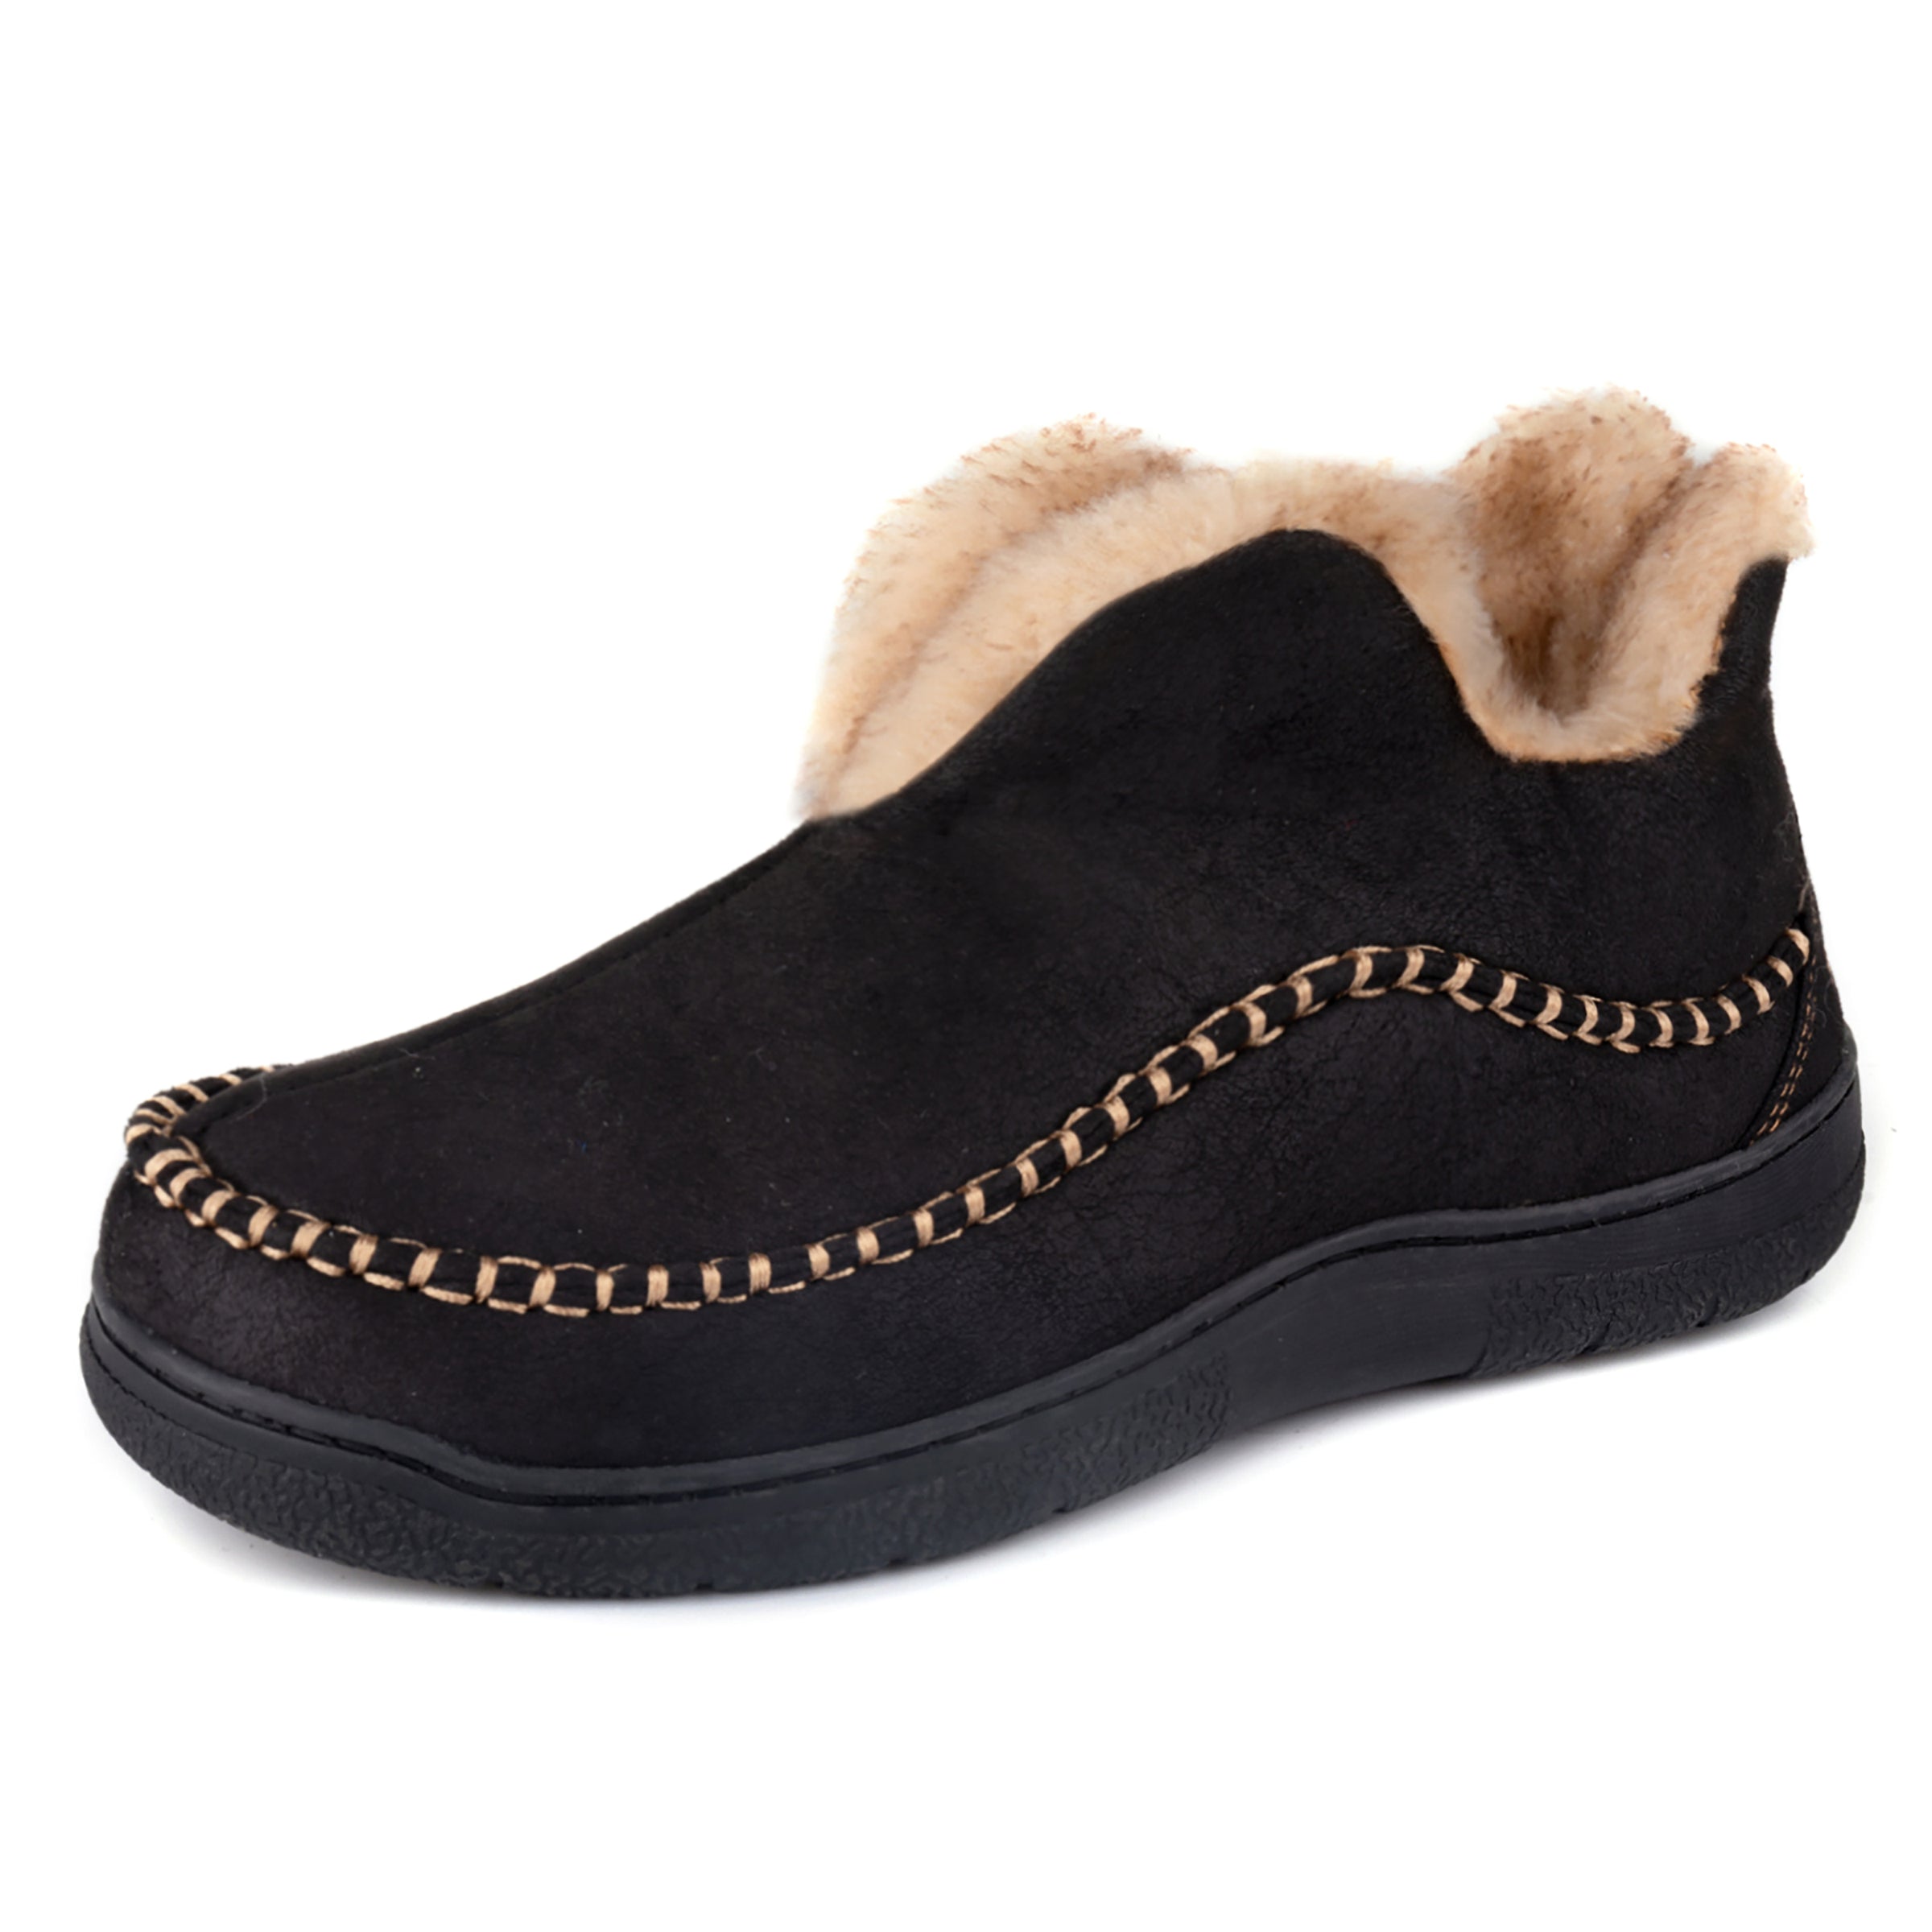 Sorel Men's Slippers Canada Collection |